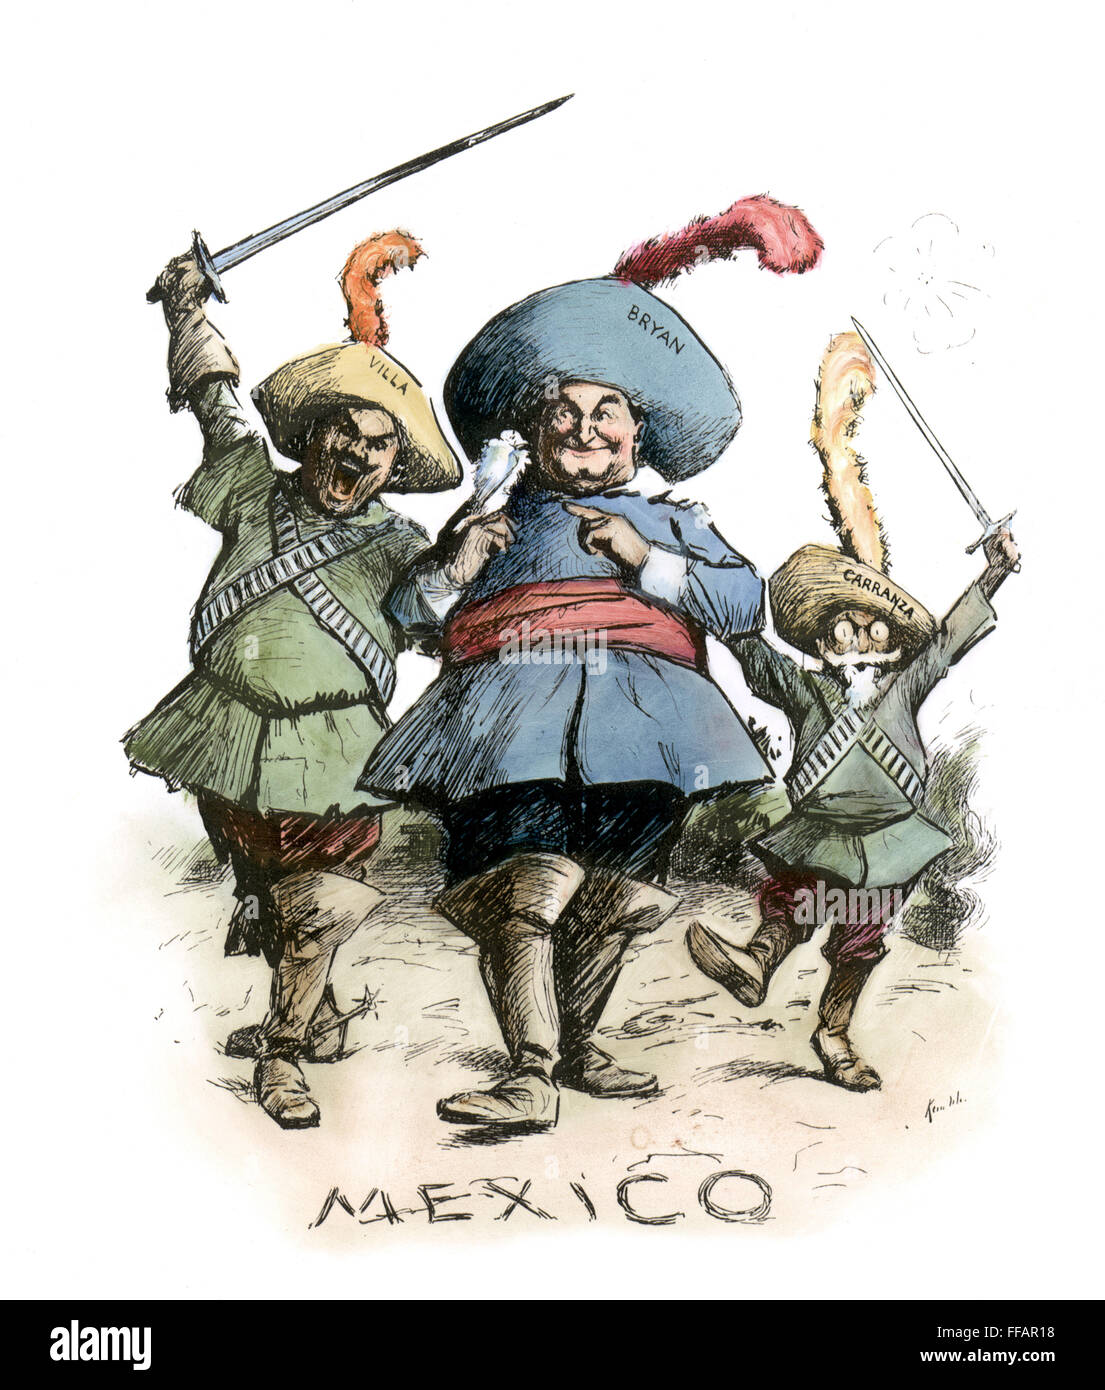 BRYAN CARTOON, c1914. /nU.S. Secretary of State William Jennings Bryan depicted as one of the Three Musketeers, together with Mexican revolutionary leaders Francisco 'Pancho' Villa (left) and Venustiano Carranza. American cartoon, c1914. Stock Photo